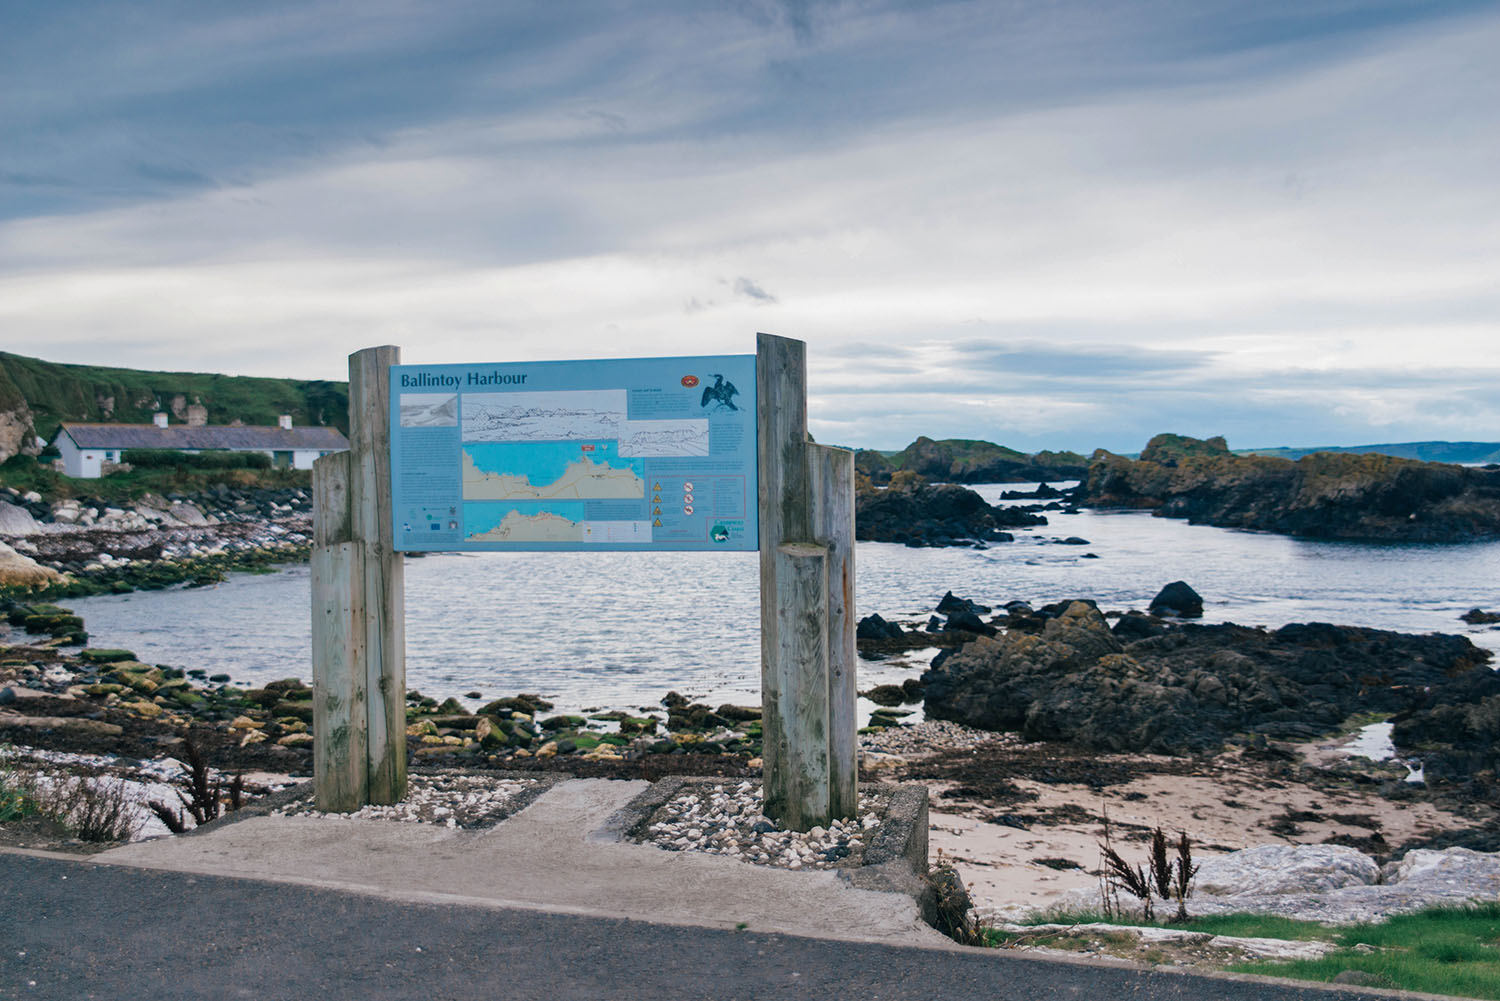 Game of Thrones Location: Ballintoy Harbour (Lordsport) The port of Pyke in the Iron Islands